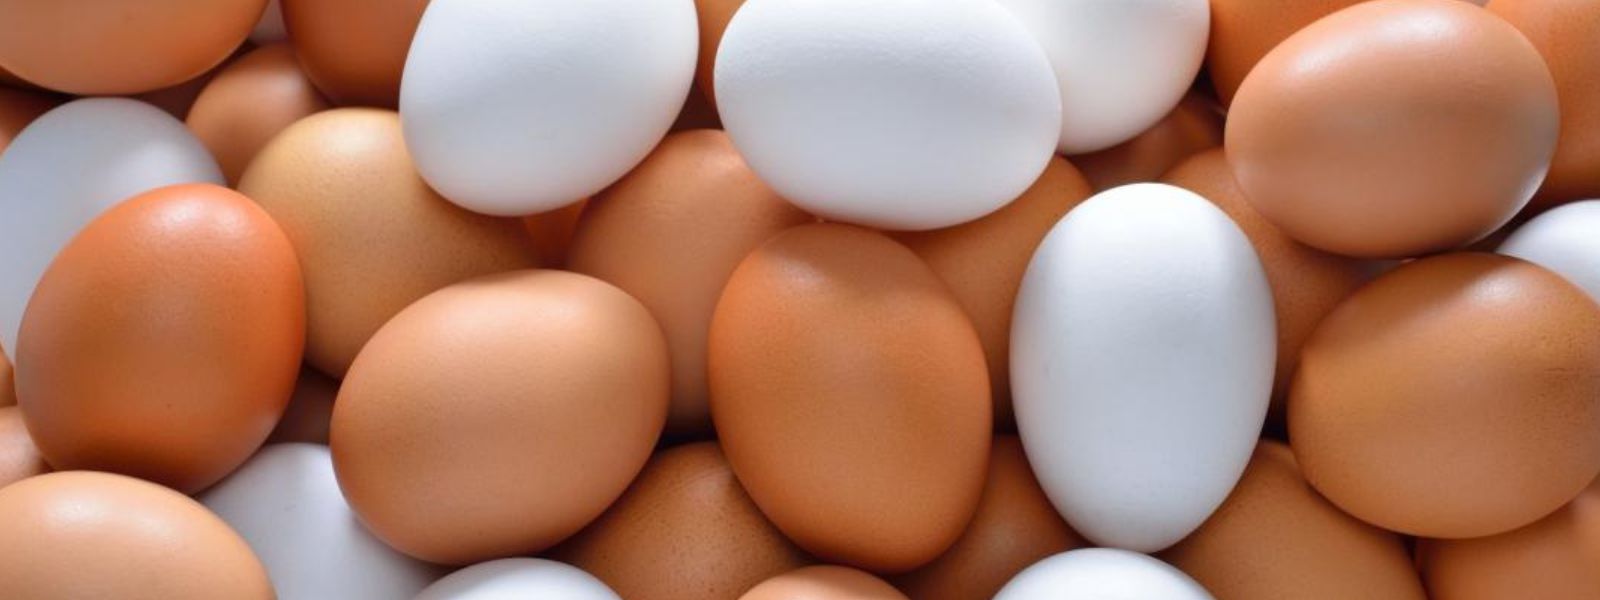 Egg prices drop in Sri Lanka after control prices were removed